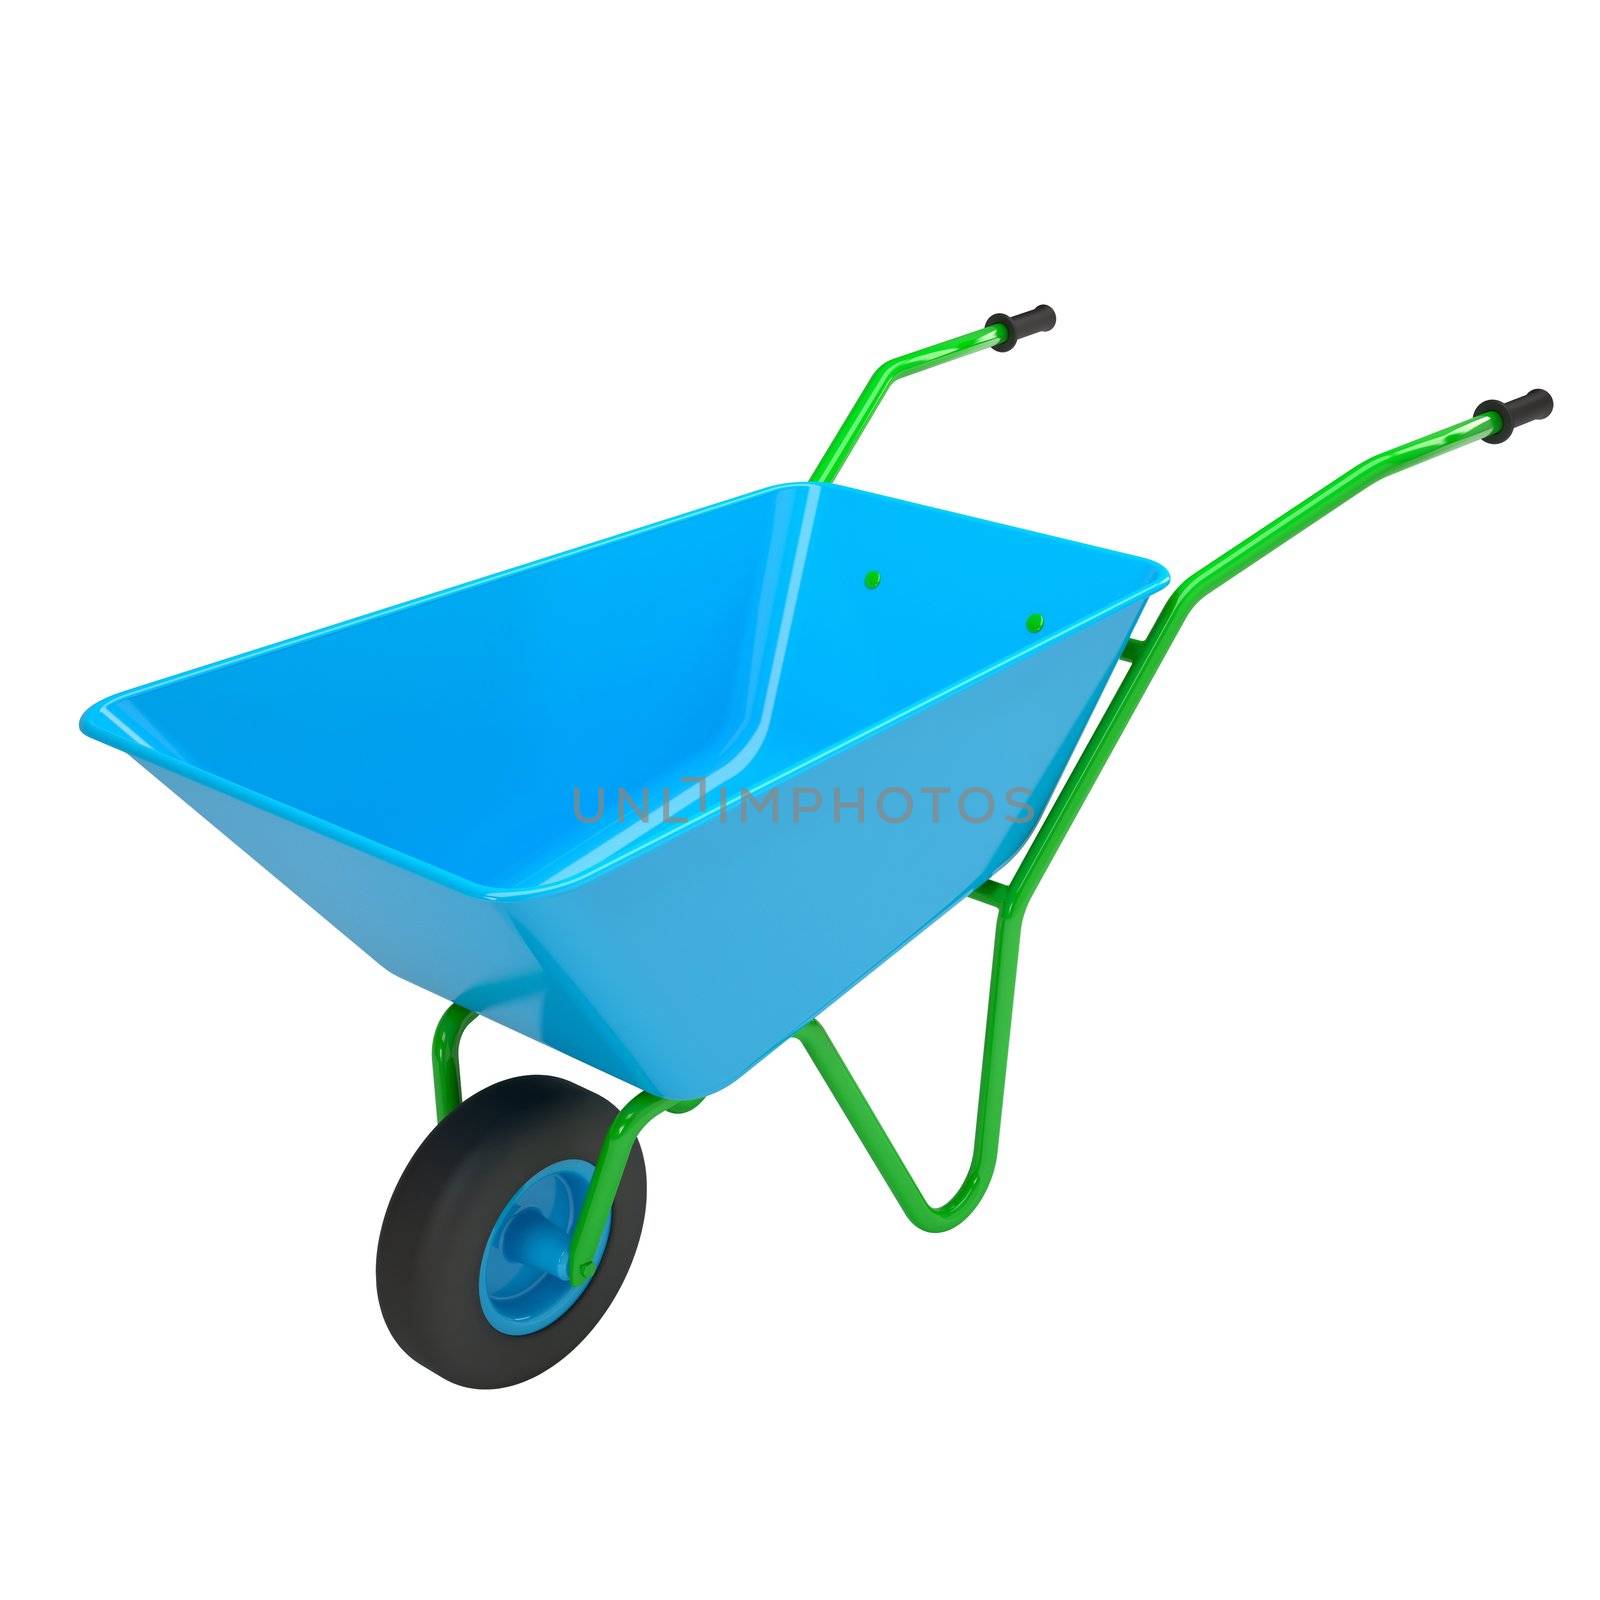 Wheelbarrows. Isolated render on a white background